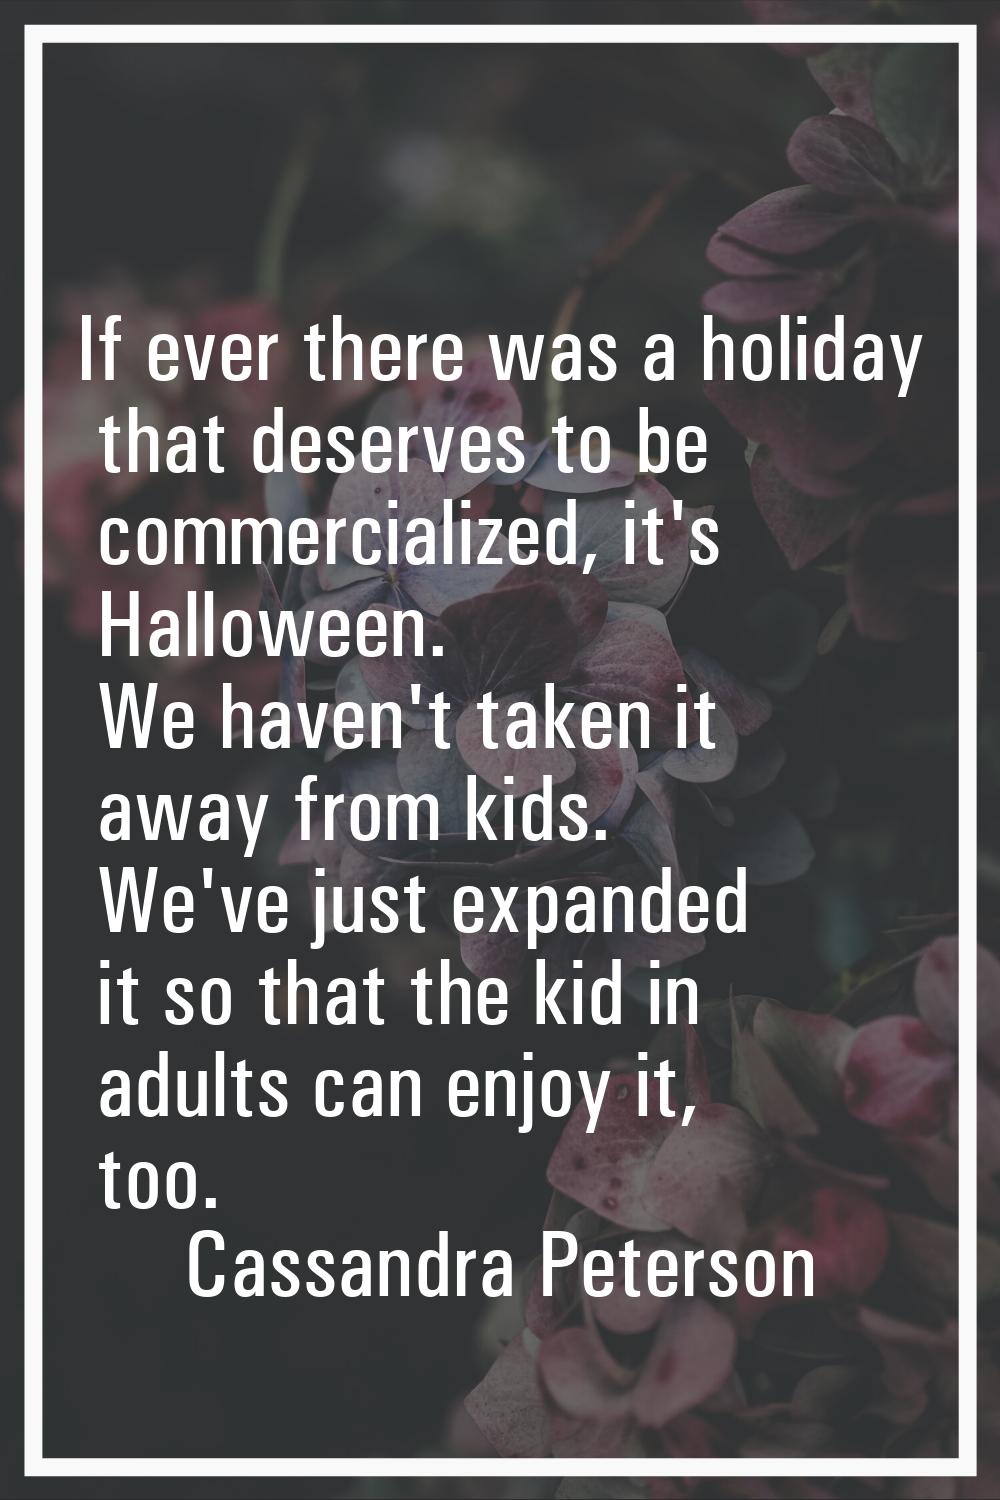 If ever there was a holiday that deserves to be commercialized, it's Halloween. We haven't taken it